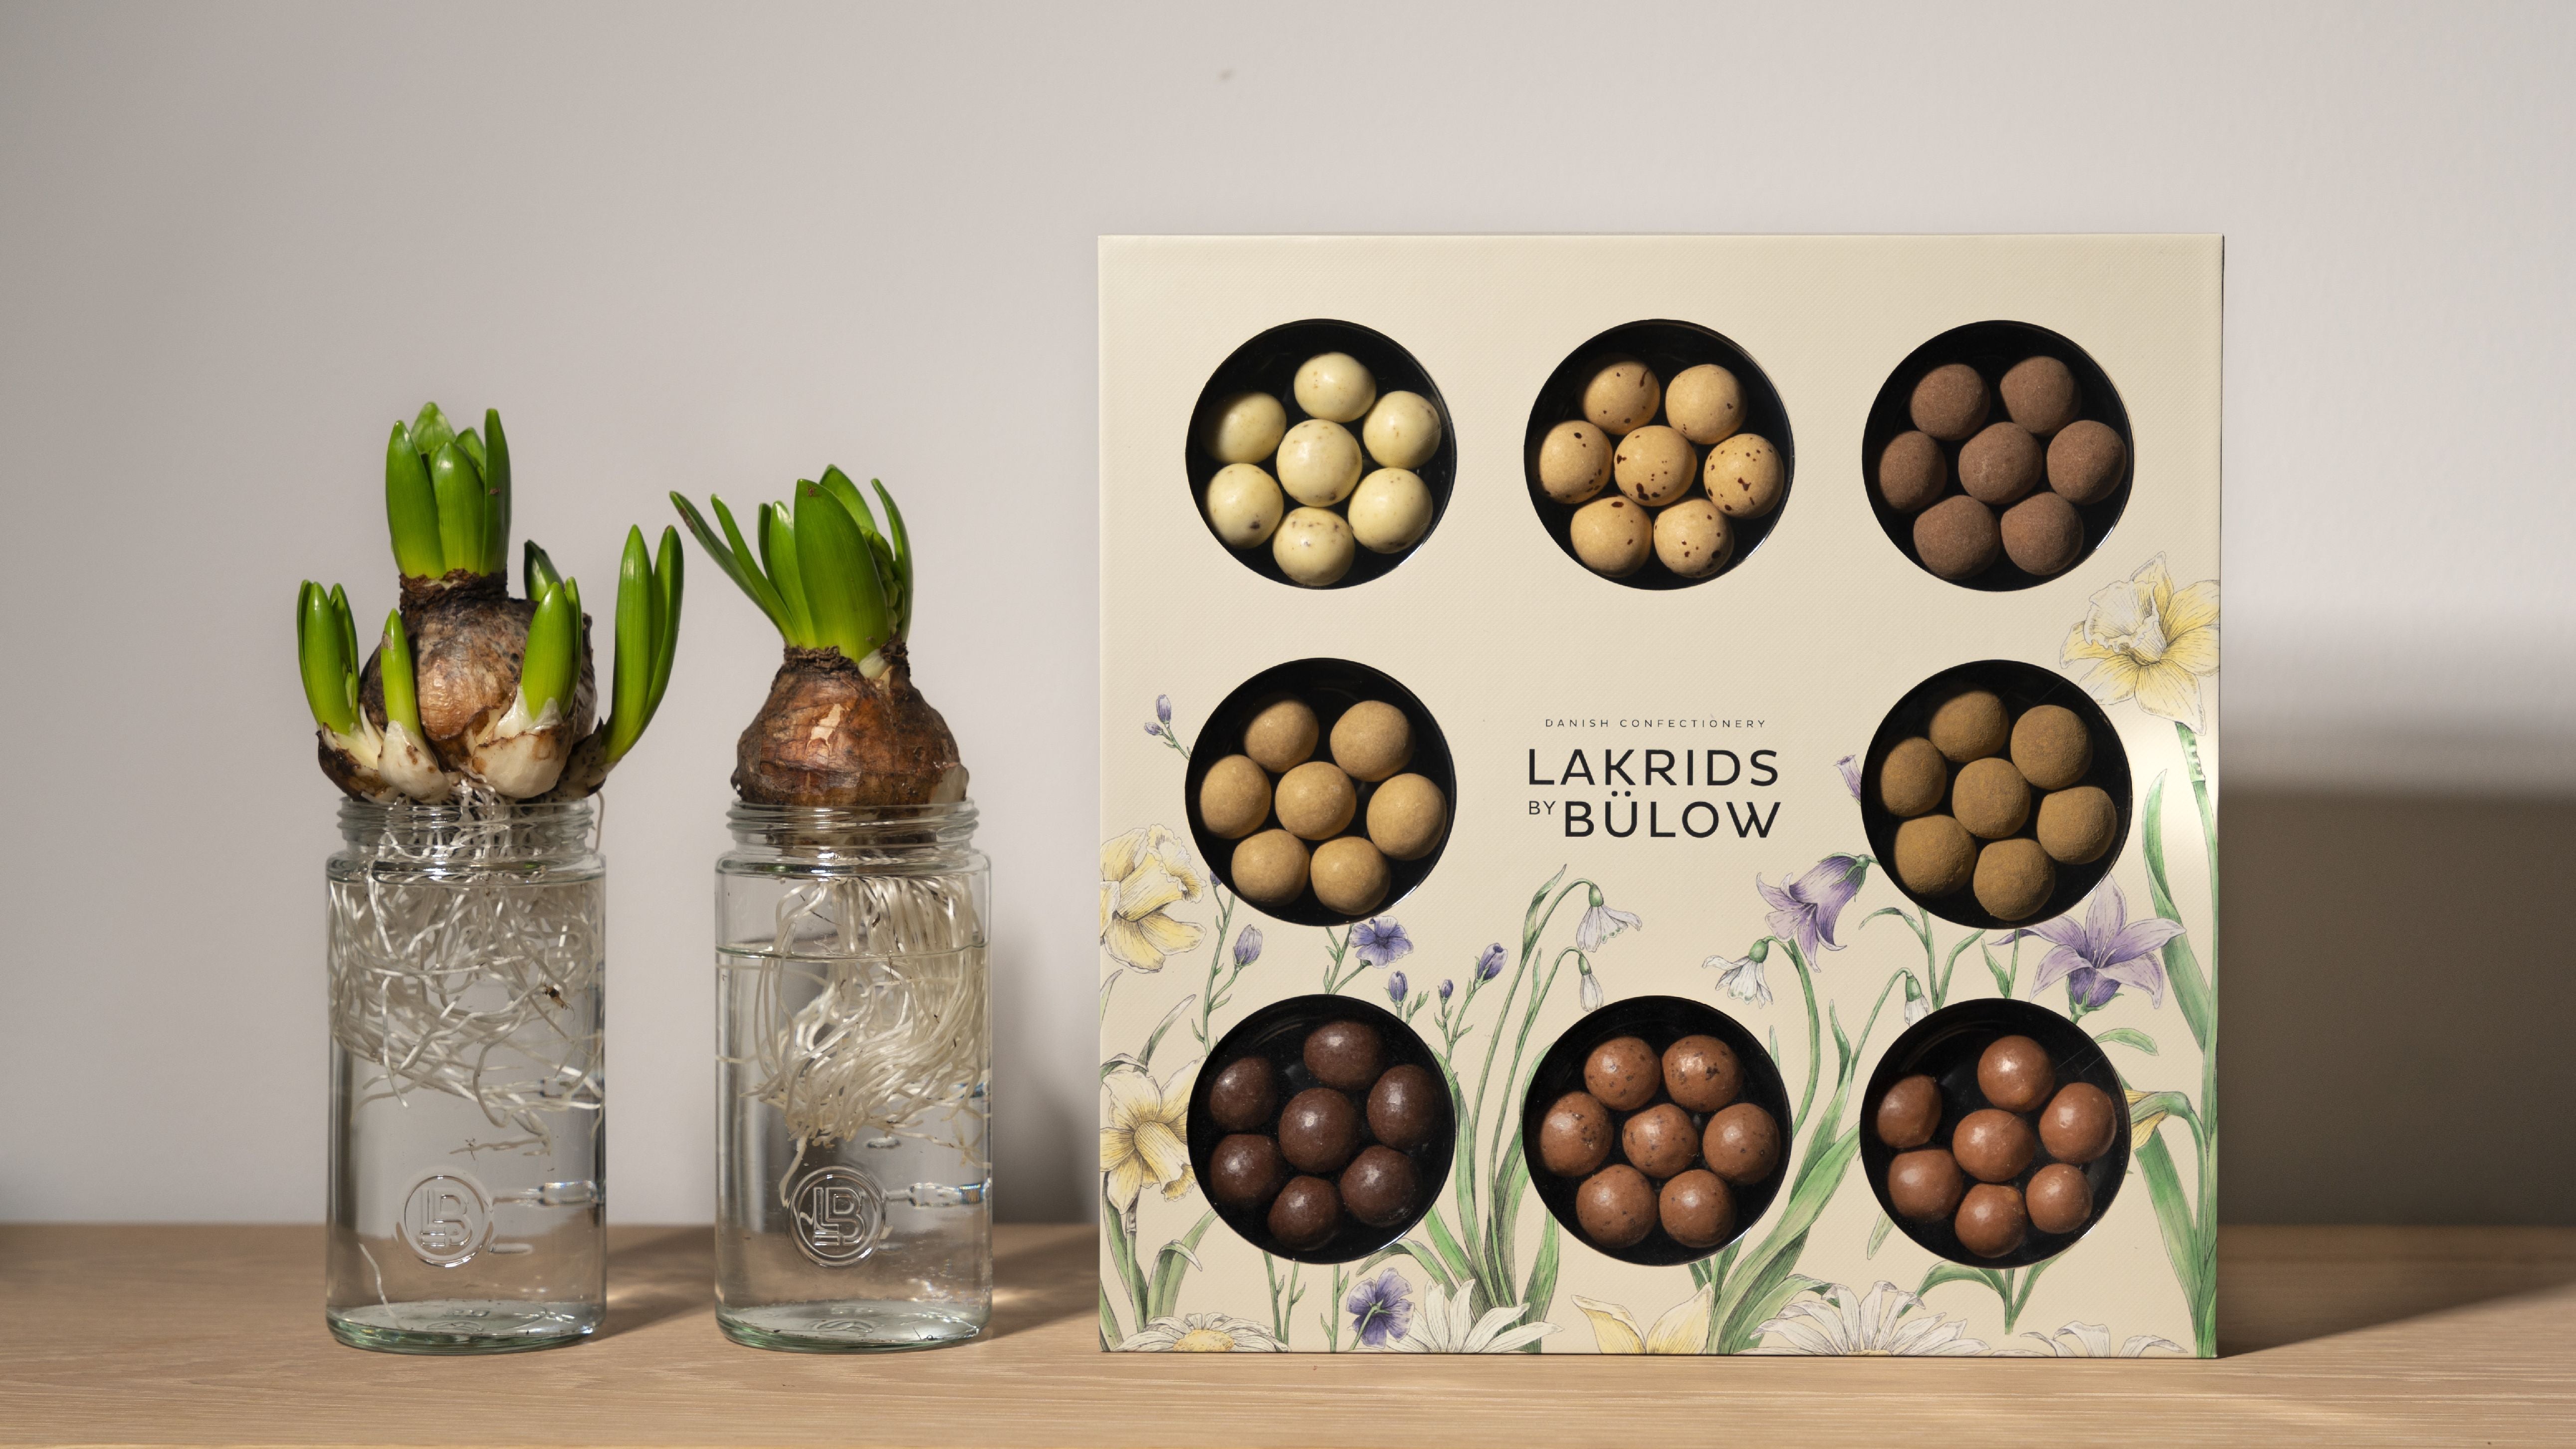 Lakrids by Bülow Osterauswahl Box Spring, 350g